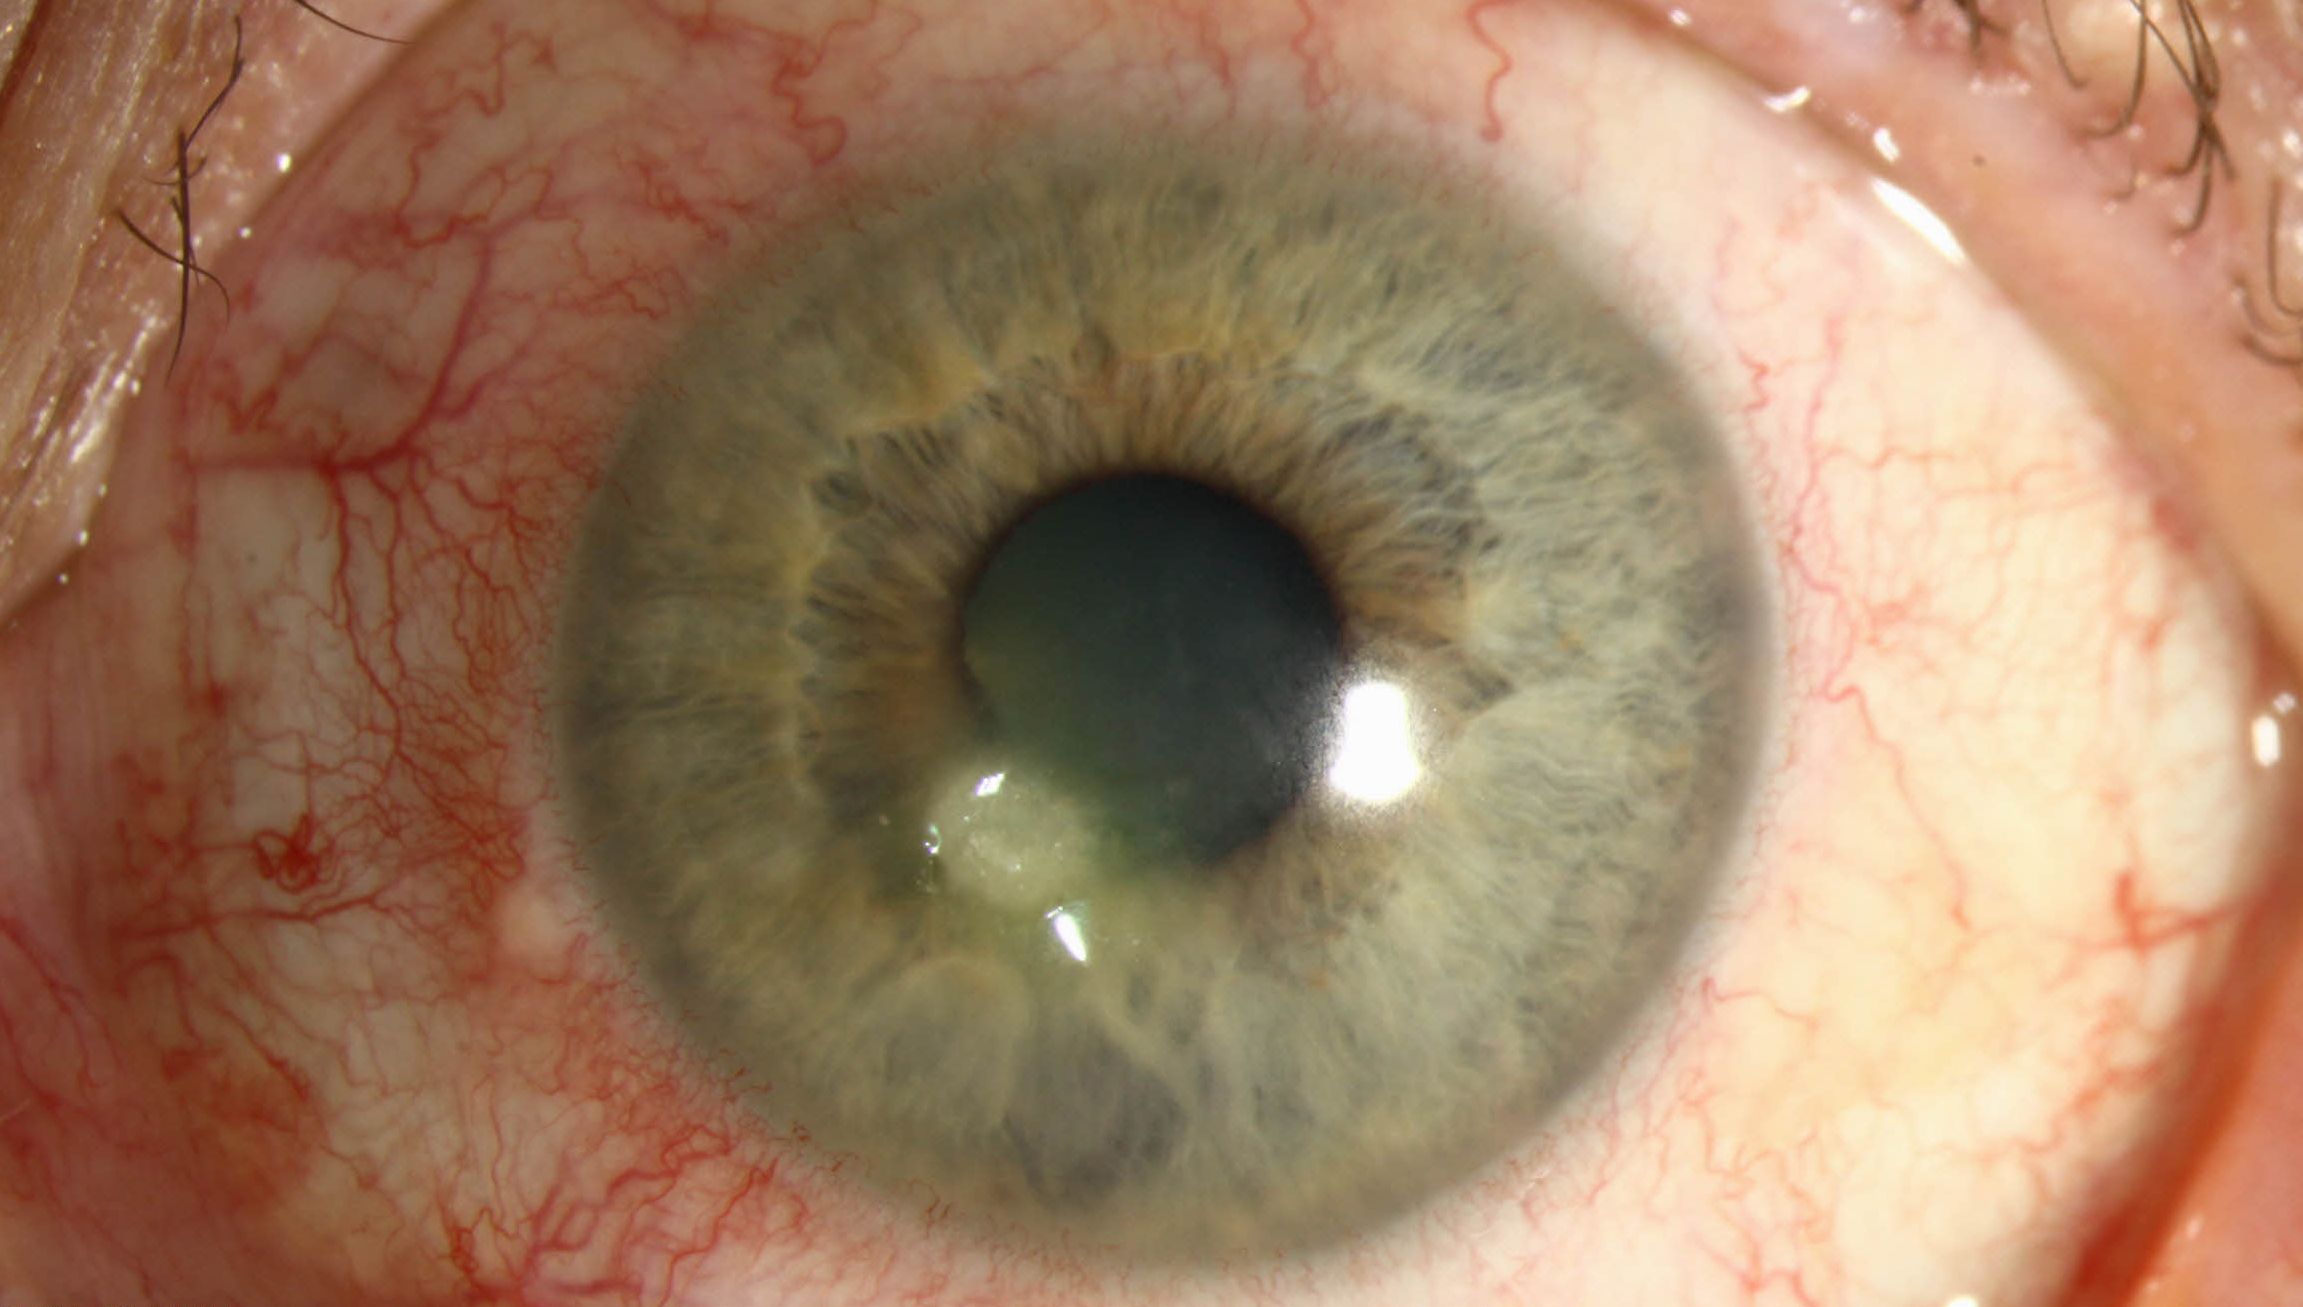 A case of Moraxella keratitis. Authors of this study suggest eyecare practitioners should make contact lens hygiene a priority with patients to help reduce the risk of bacterial keratitis.